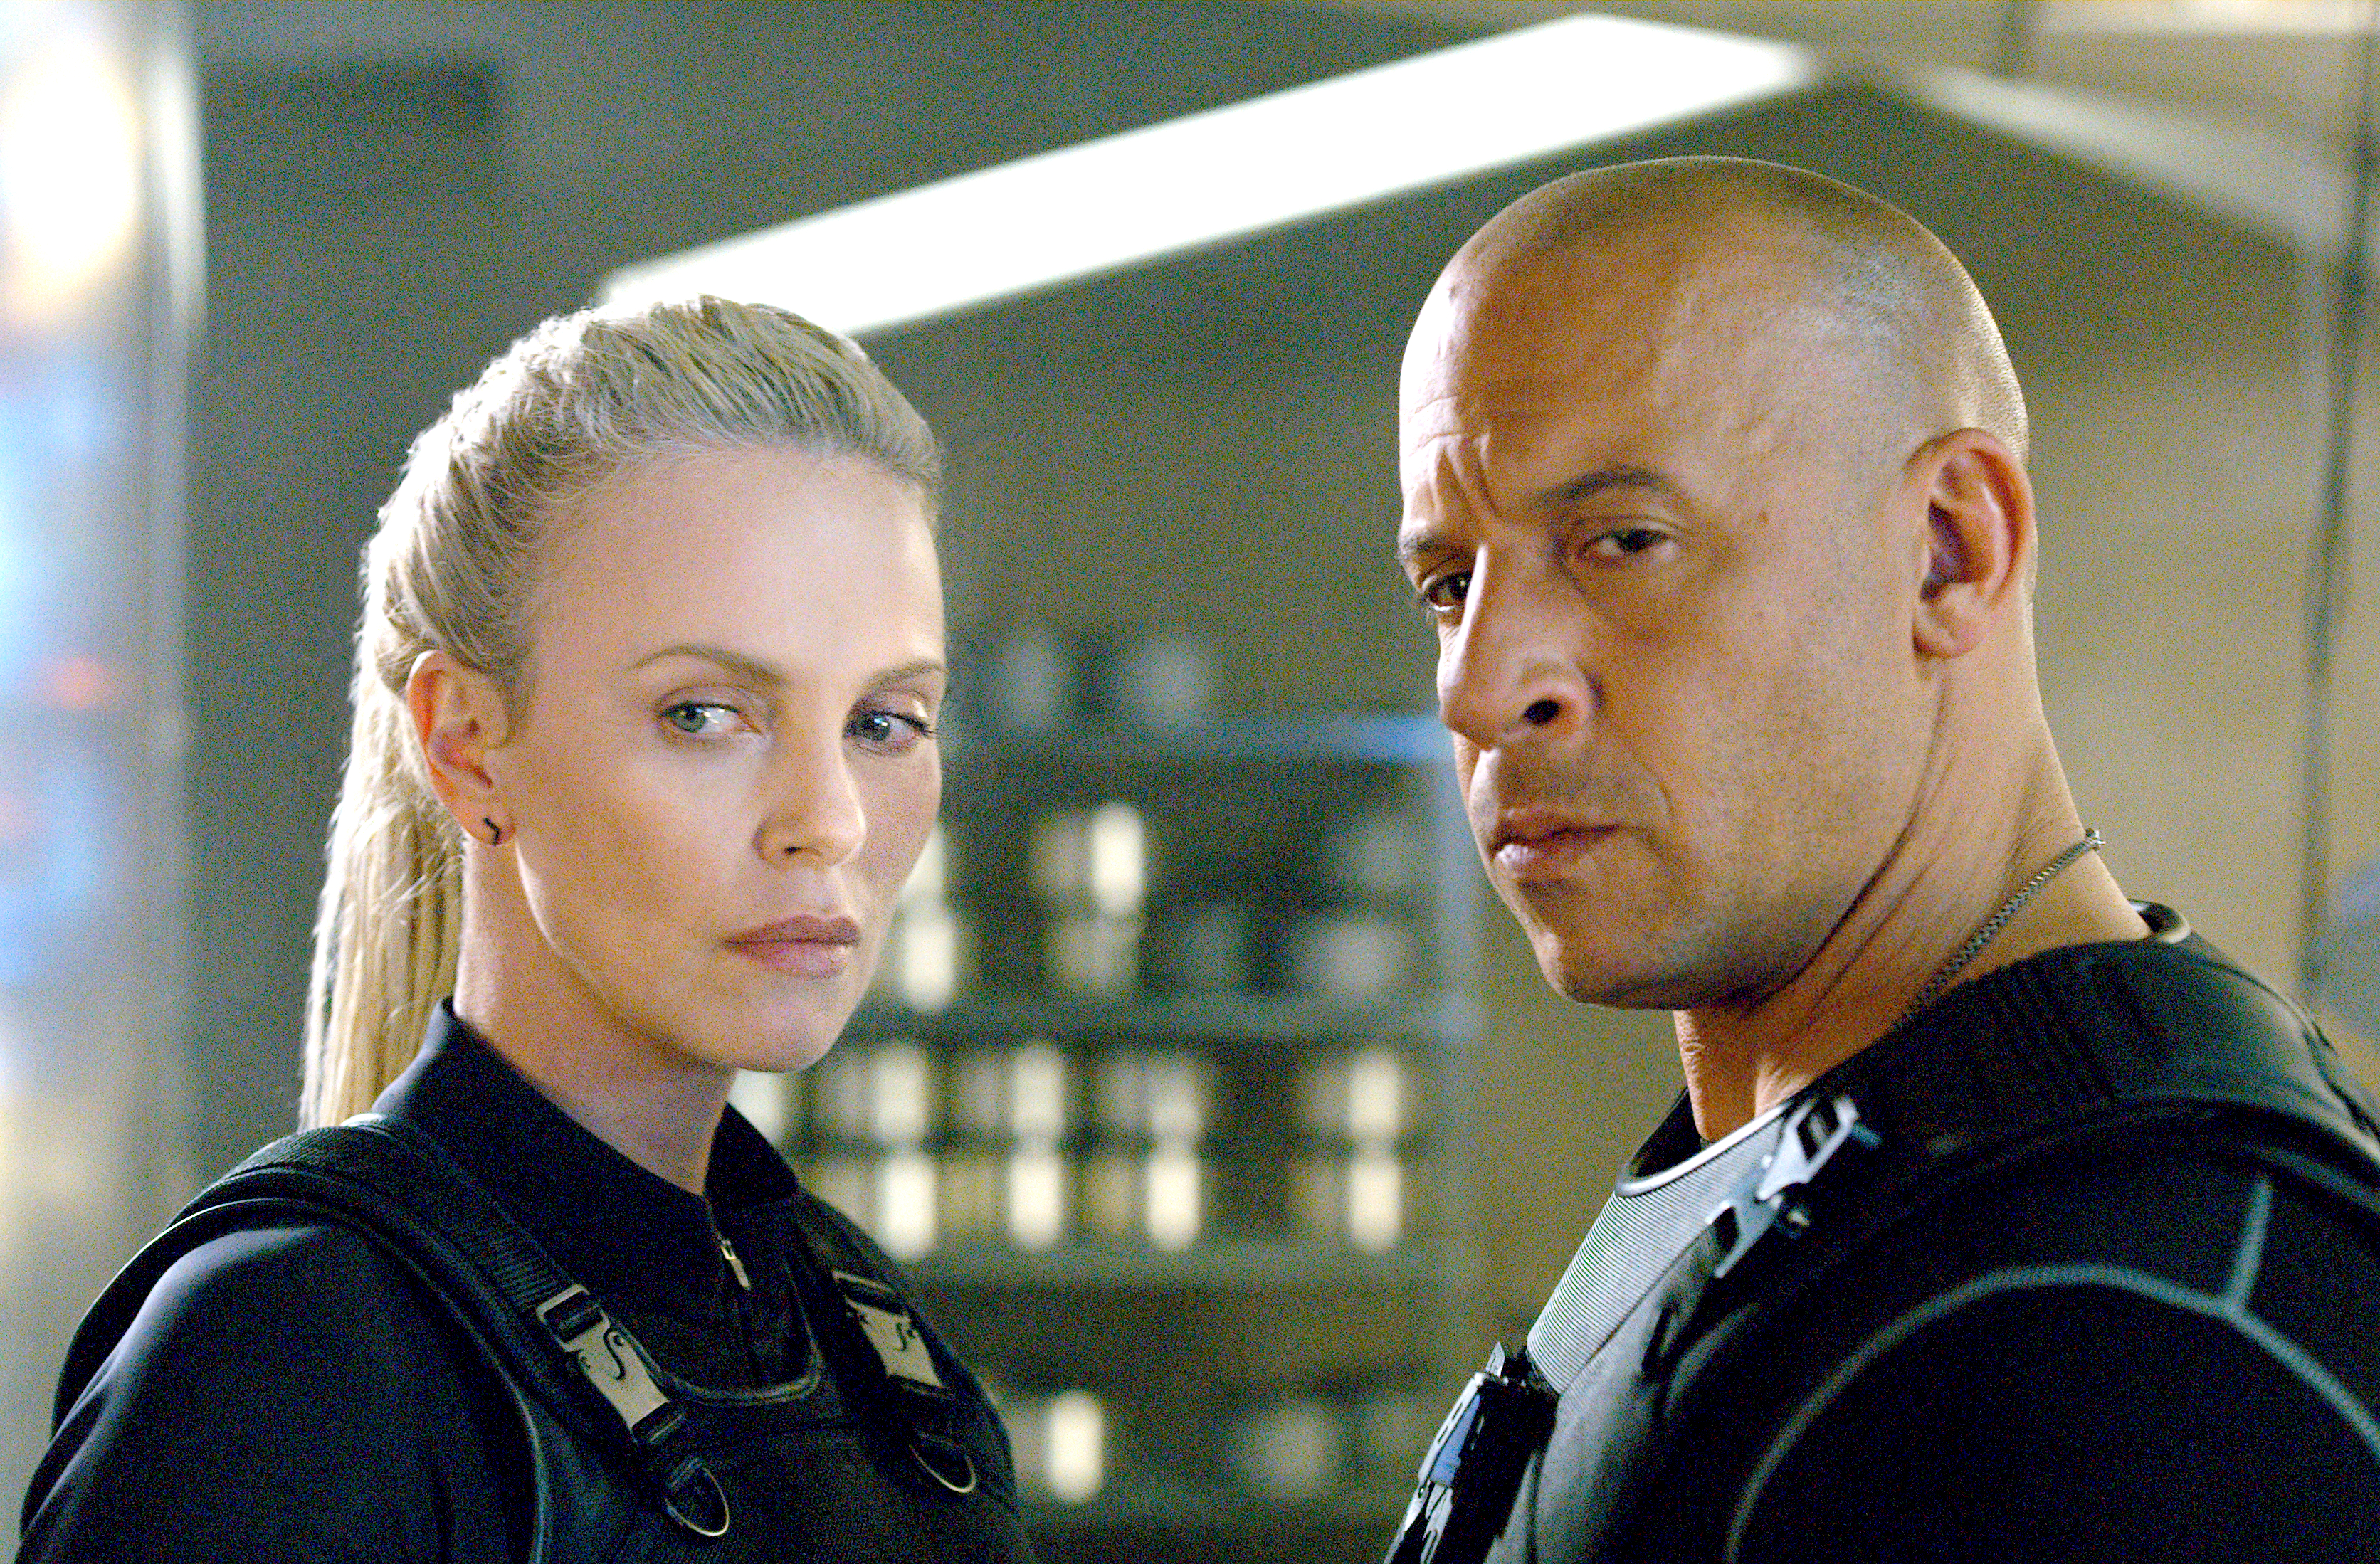 This image shows Charlize Theron (left) and Vin Diesel in "The Fate of the Furious." (Universal Pictures via AP)